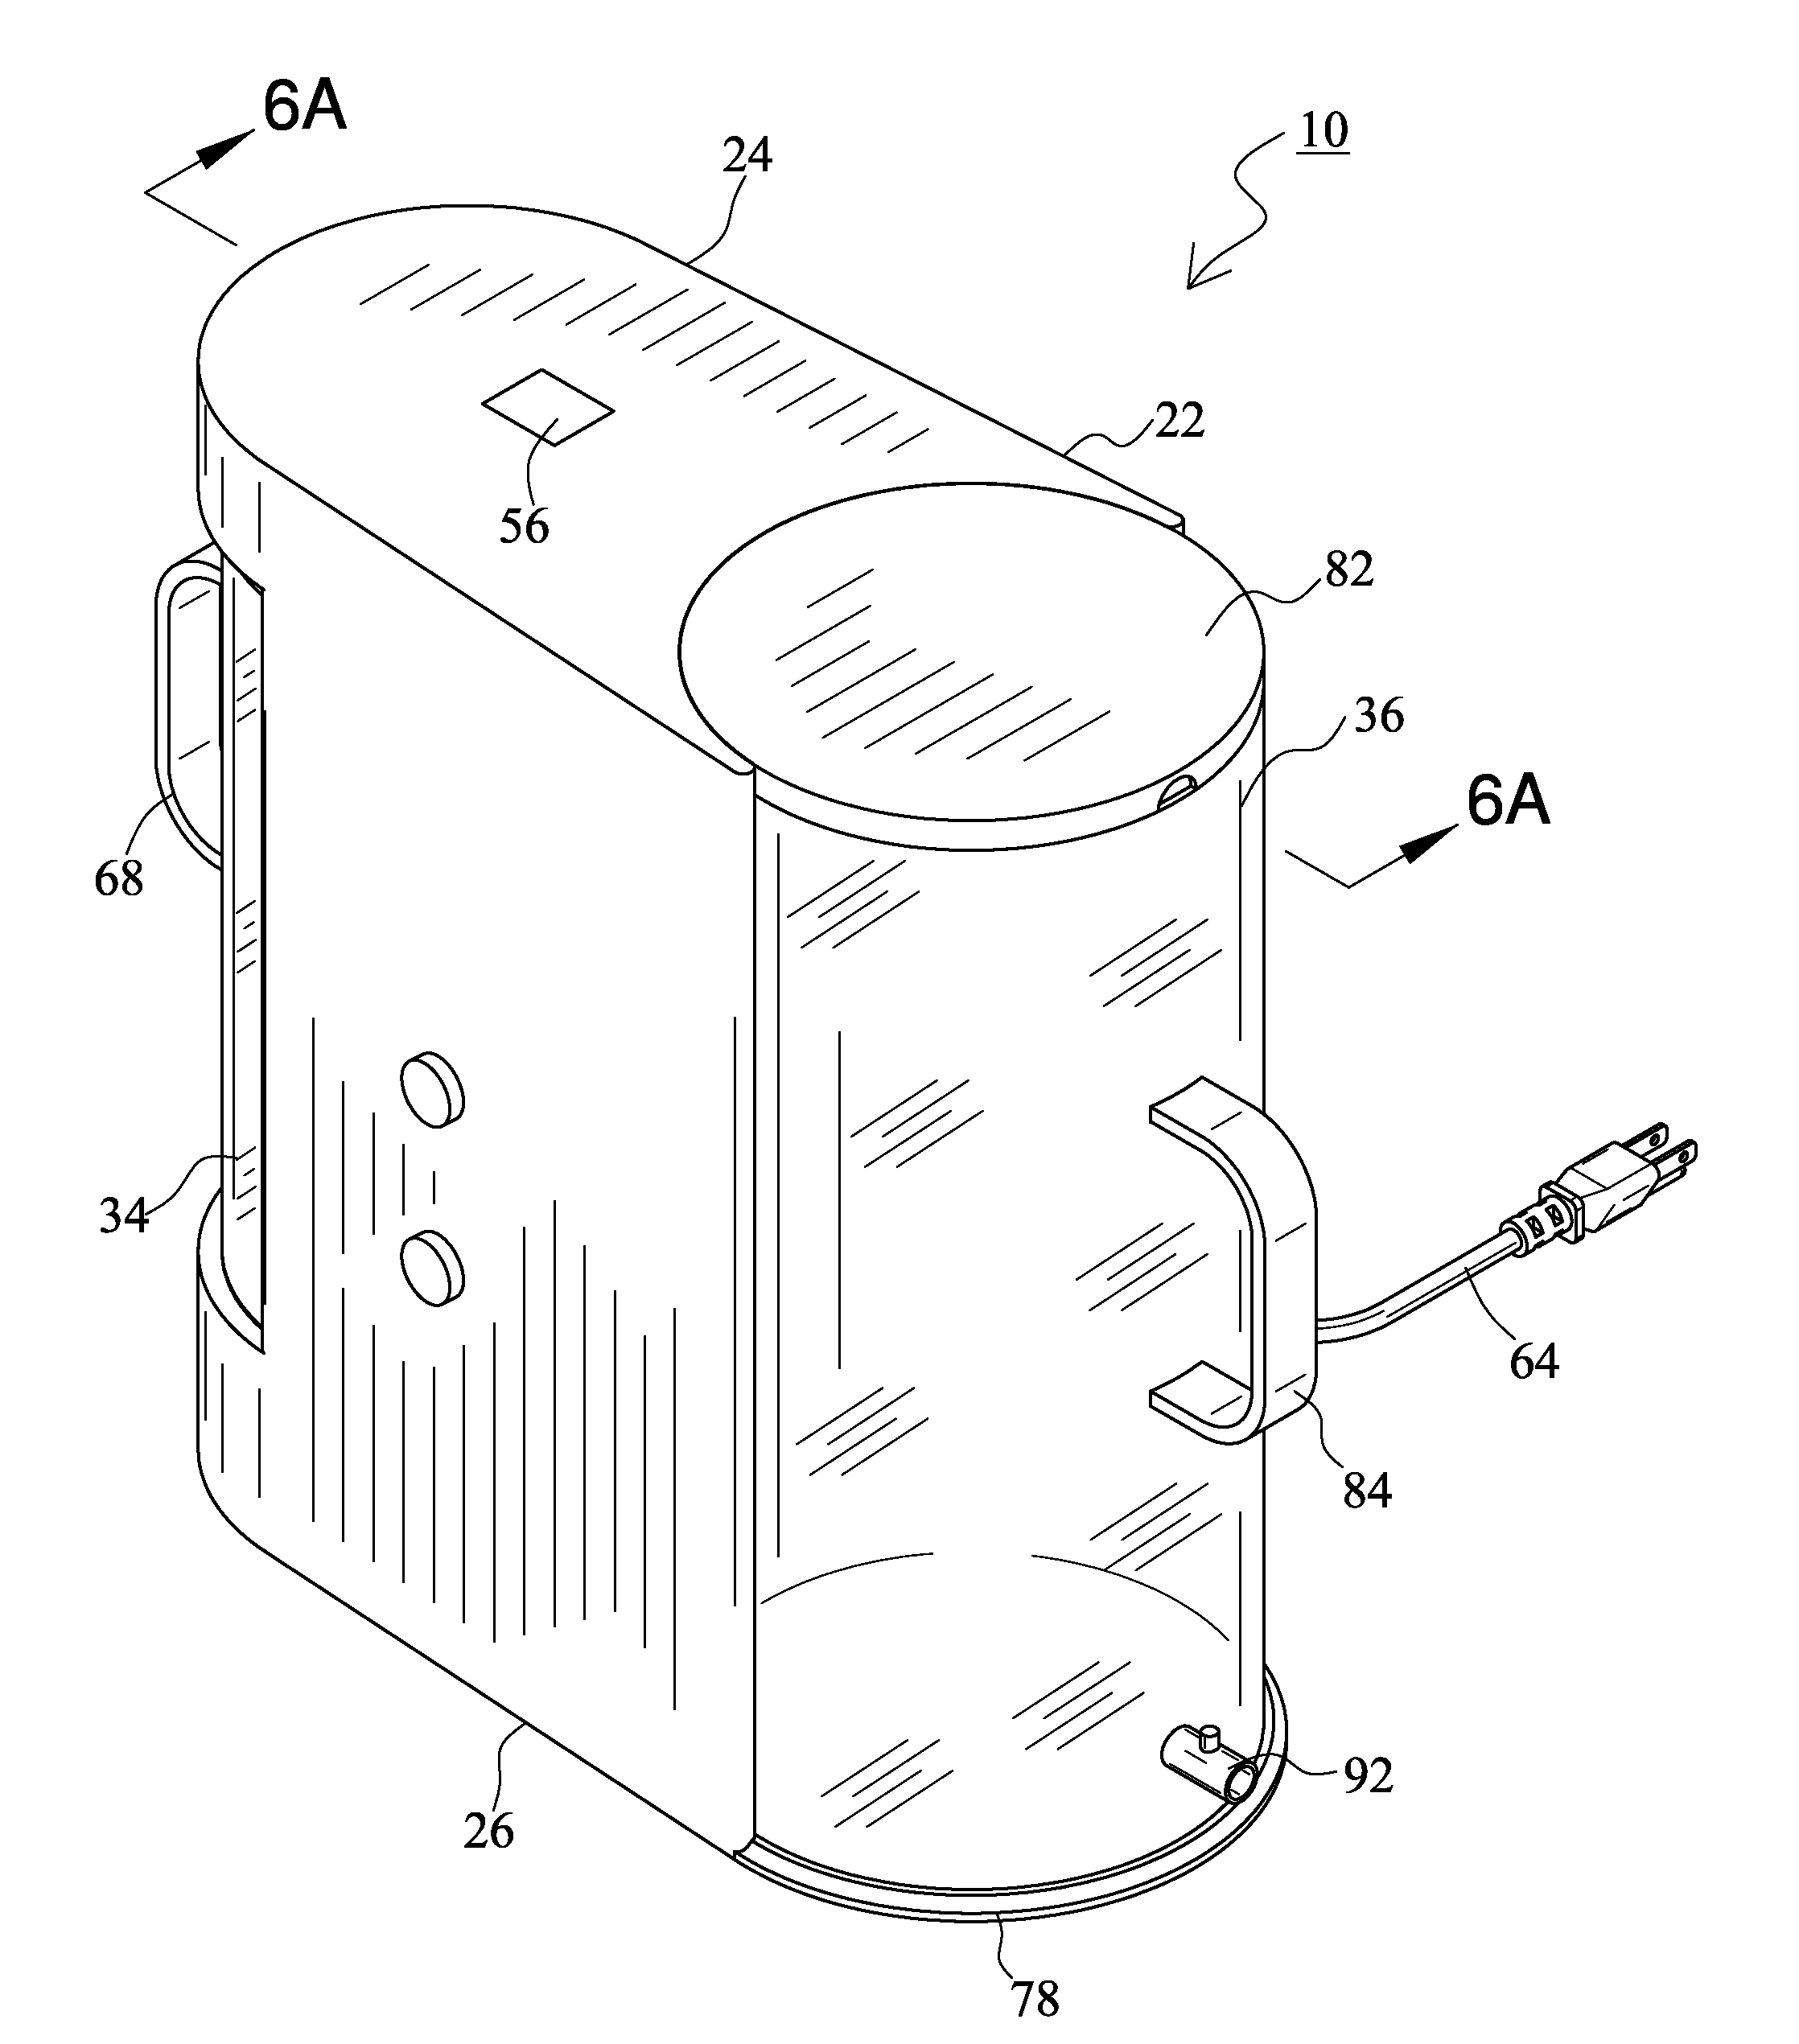 Apparatus for Washing and Sanitizing Articles for an Infant